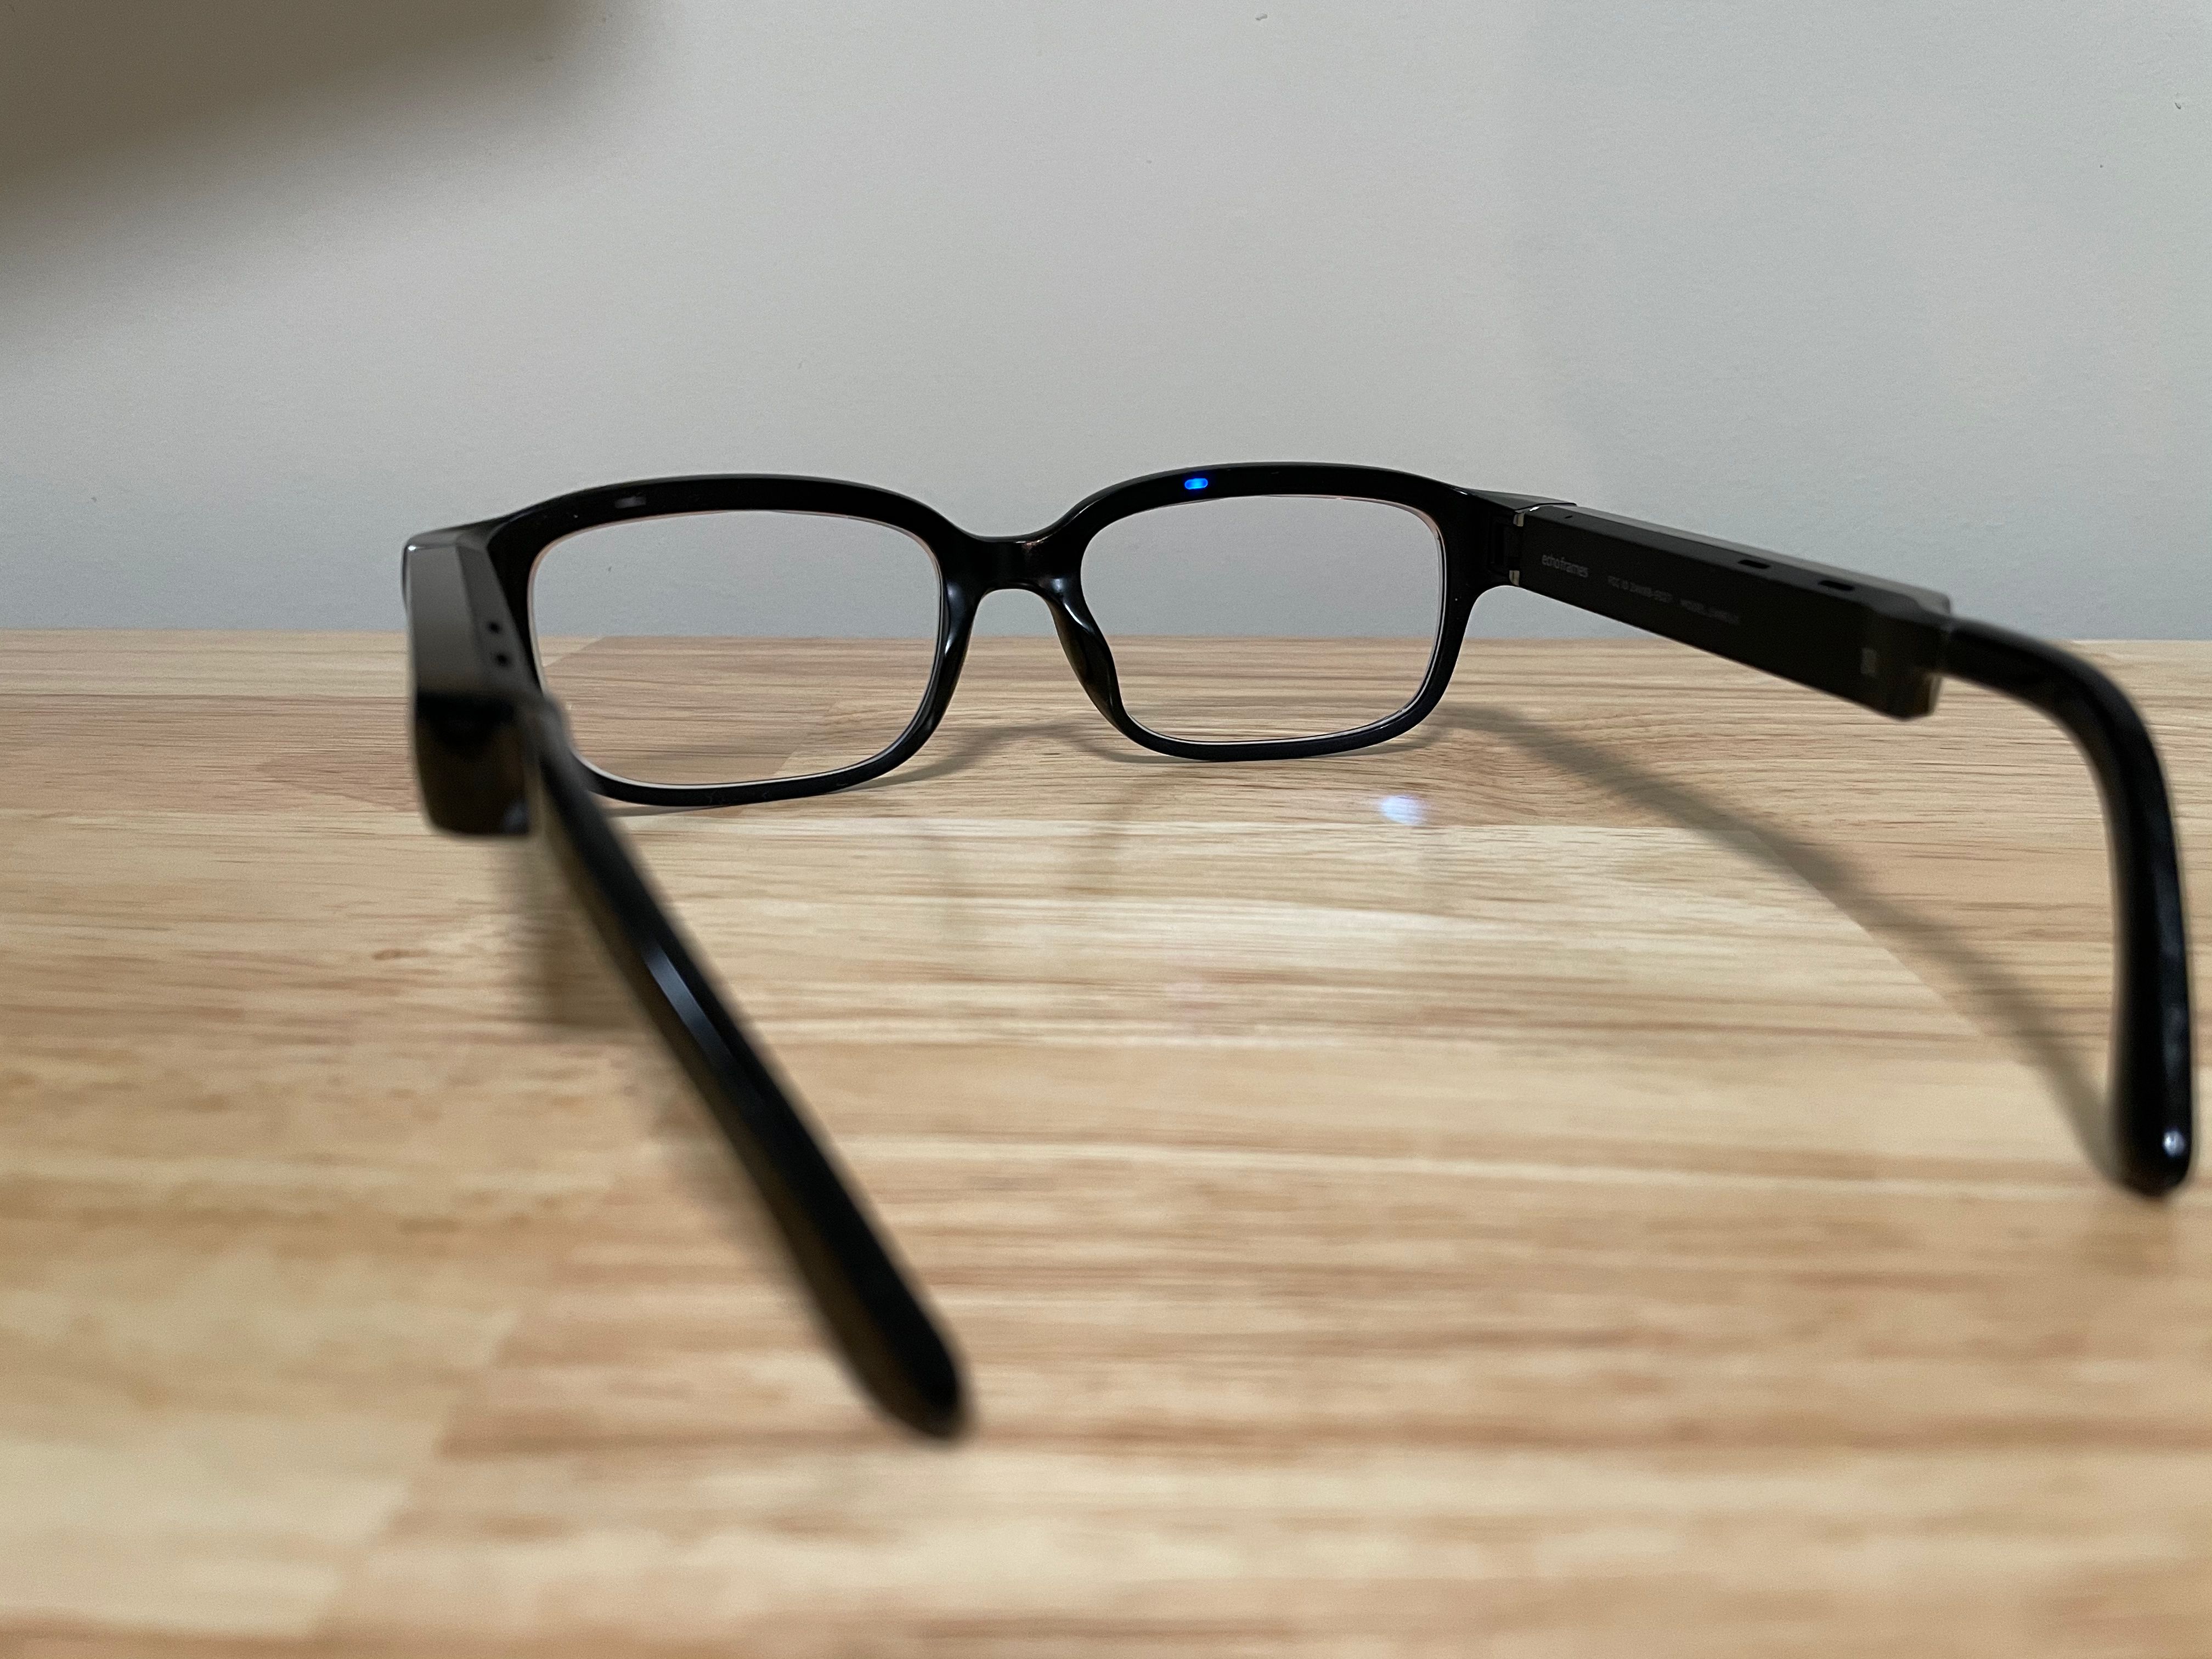 Echo Frames reviewed: Are they worth the price? - Stacey on IoT